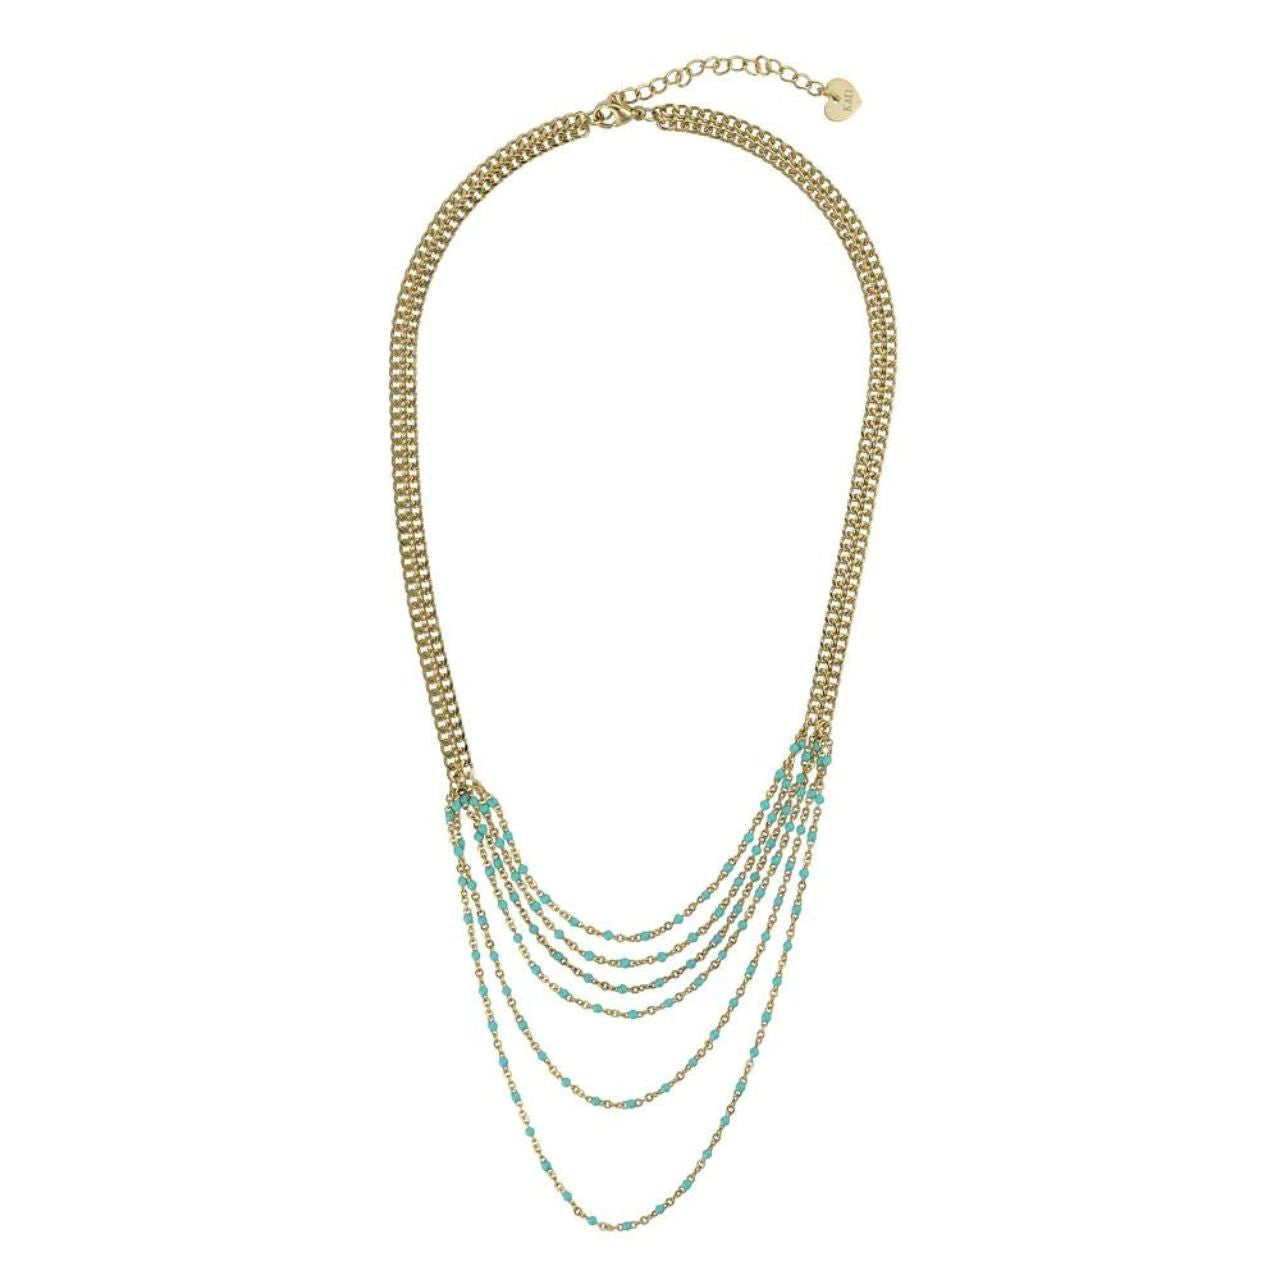 Elegant flat chain with 6 lower layers embellished with tiny turquoise stones. Lobster claw fastening.